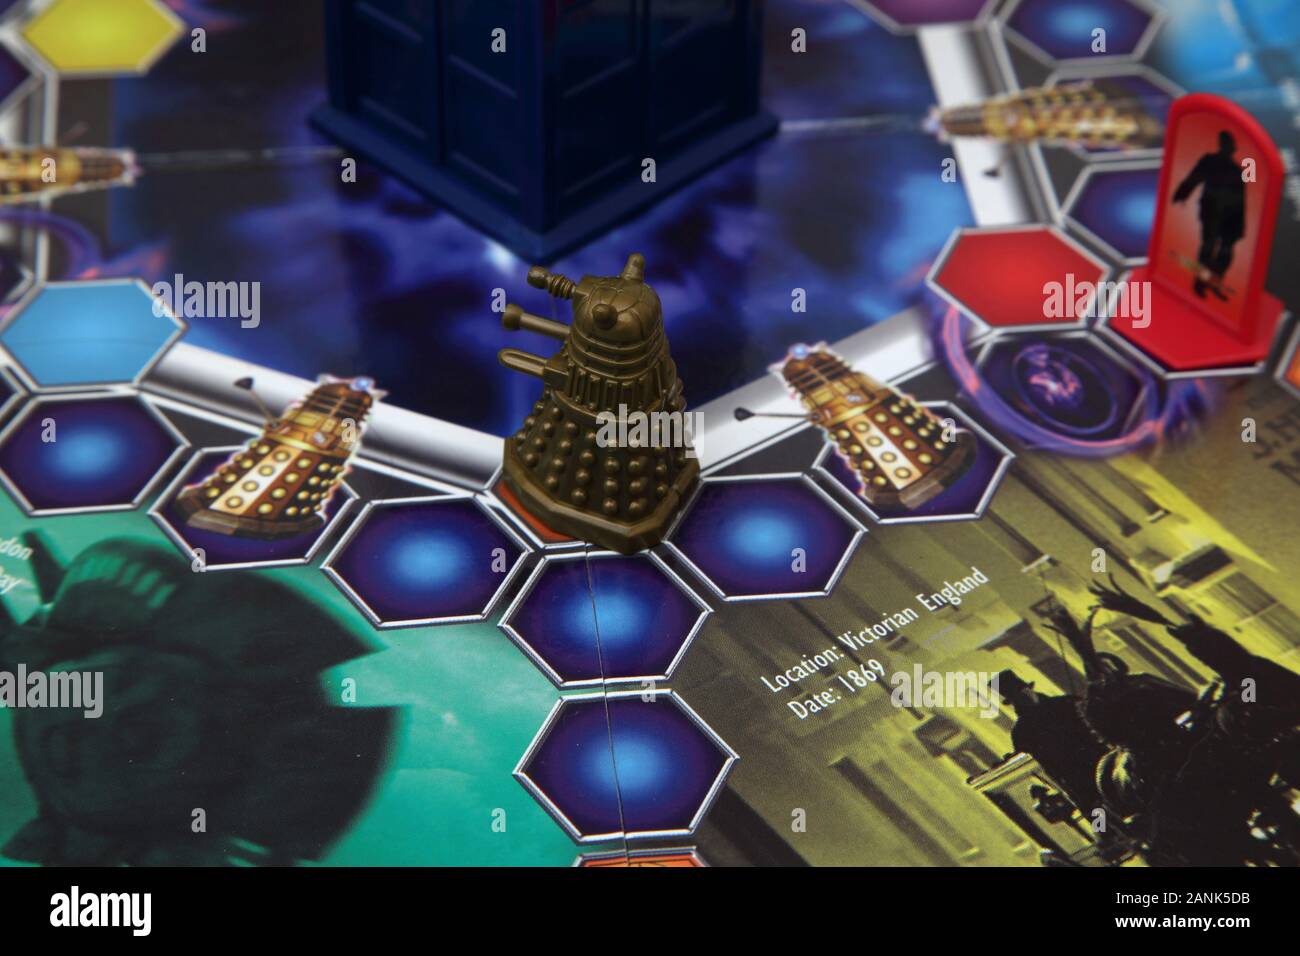 Doctor Who Interactive Electronic Board Game Dalek Stock Photo